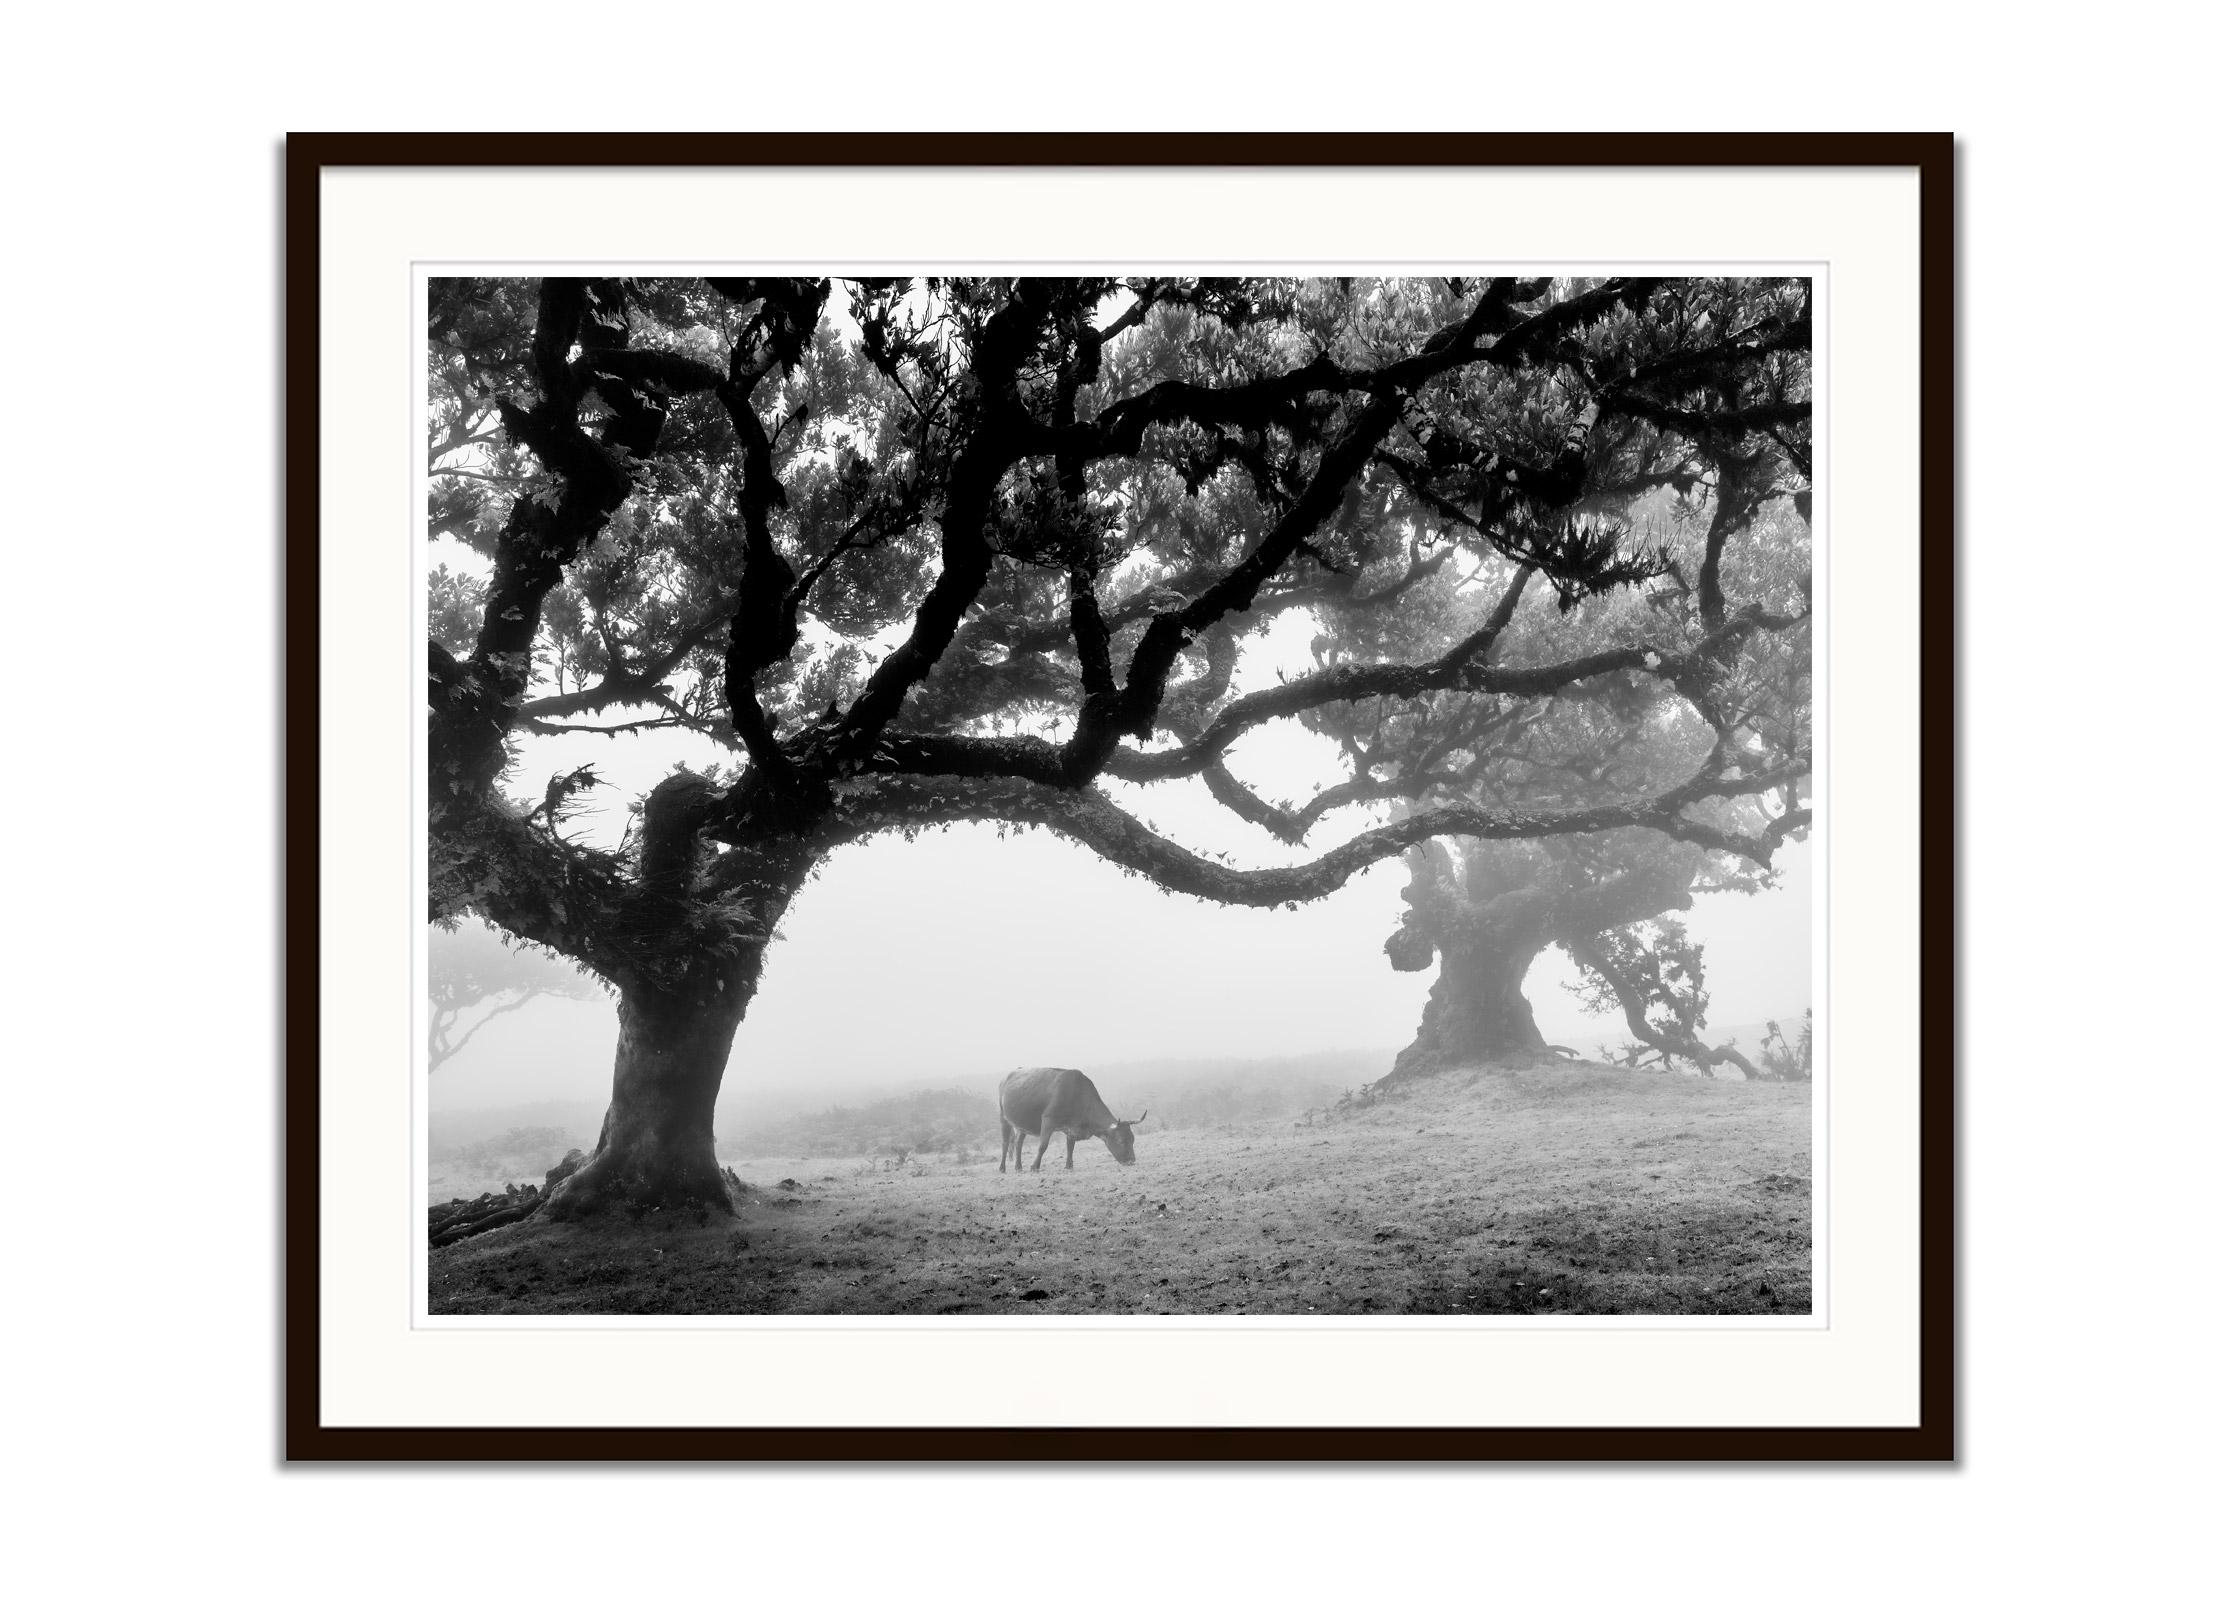 Cows on the foggy Pasture, Madeira, black and white photography, landscape, art - Black Landscape Photograph by Gerald Berghammer